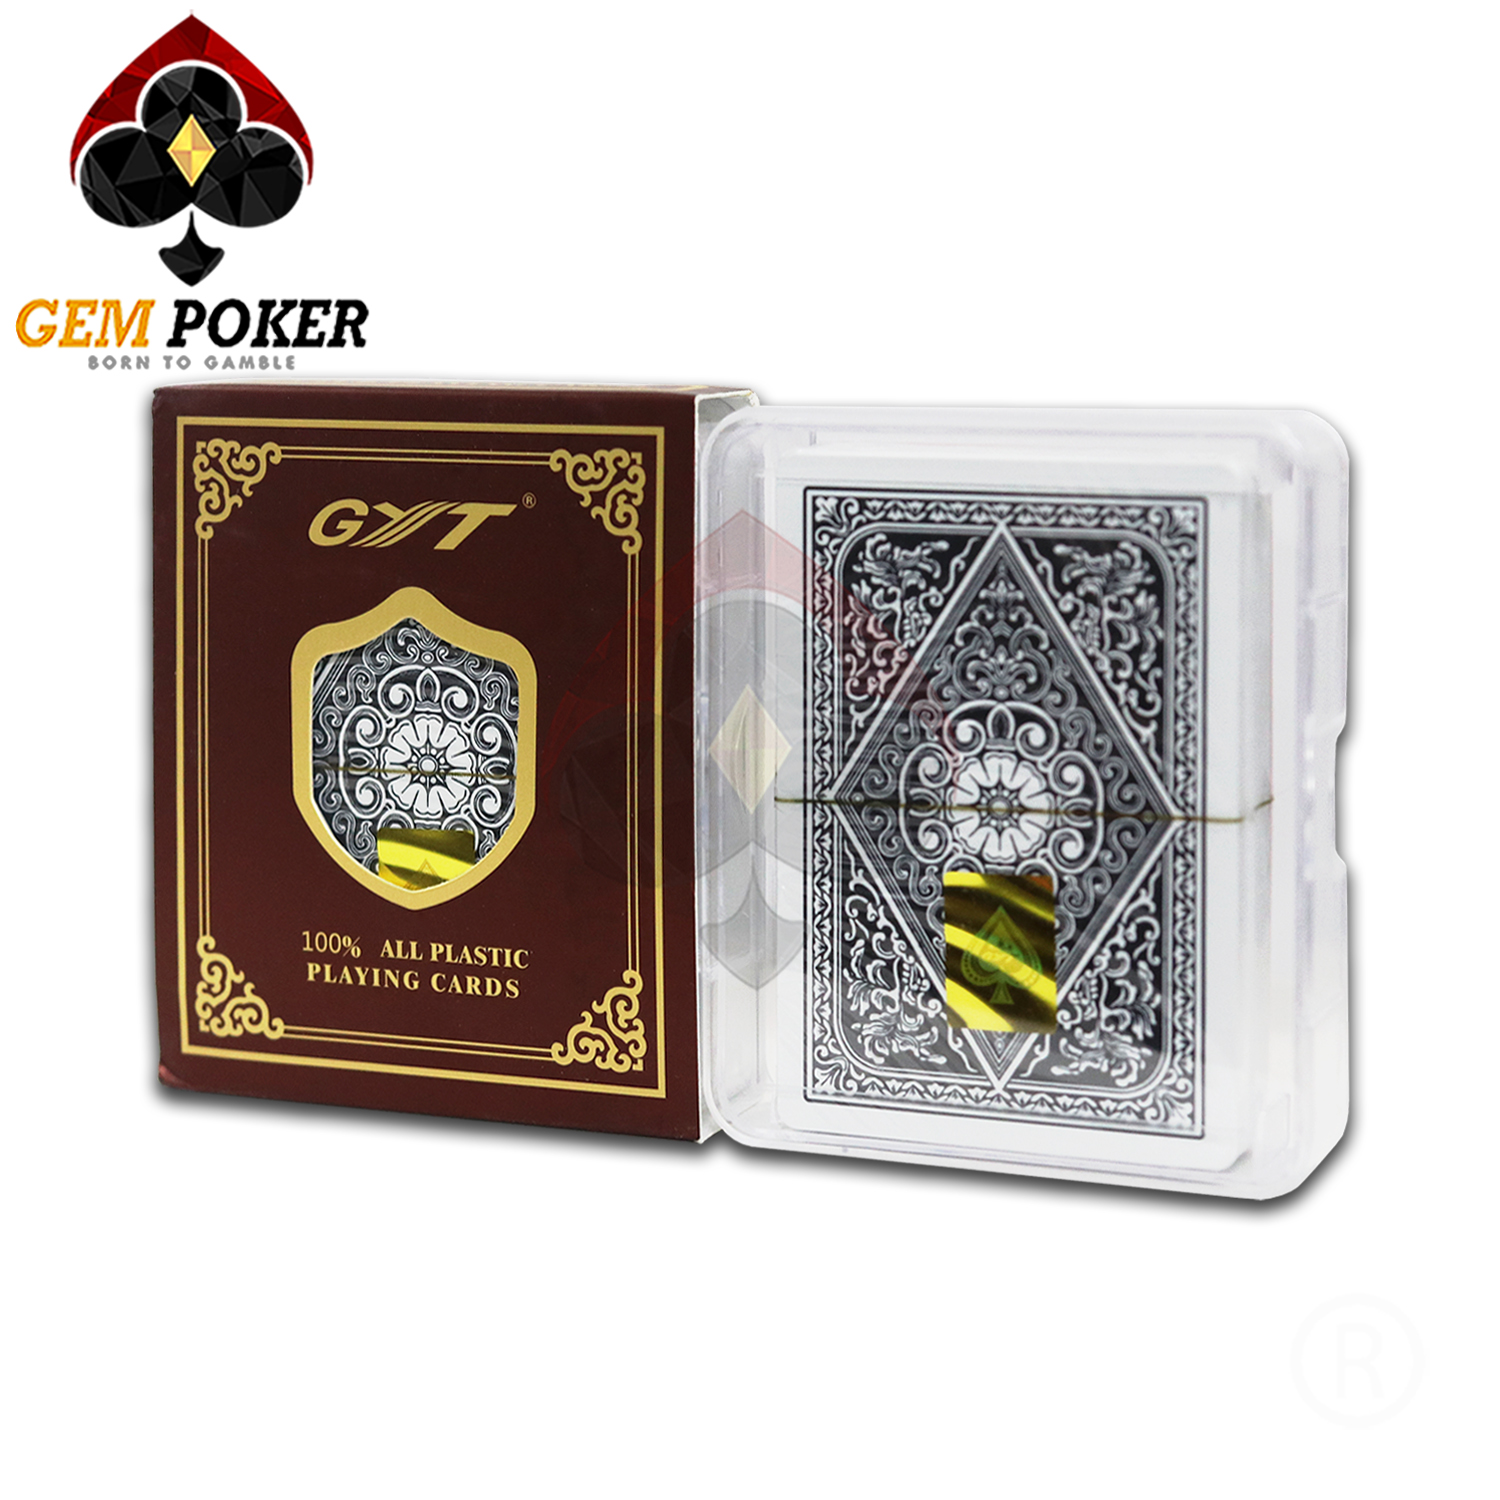 GYT POKER PLAYING CARDS